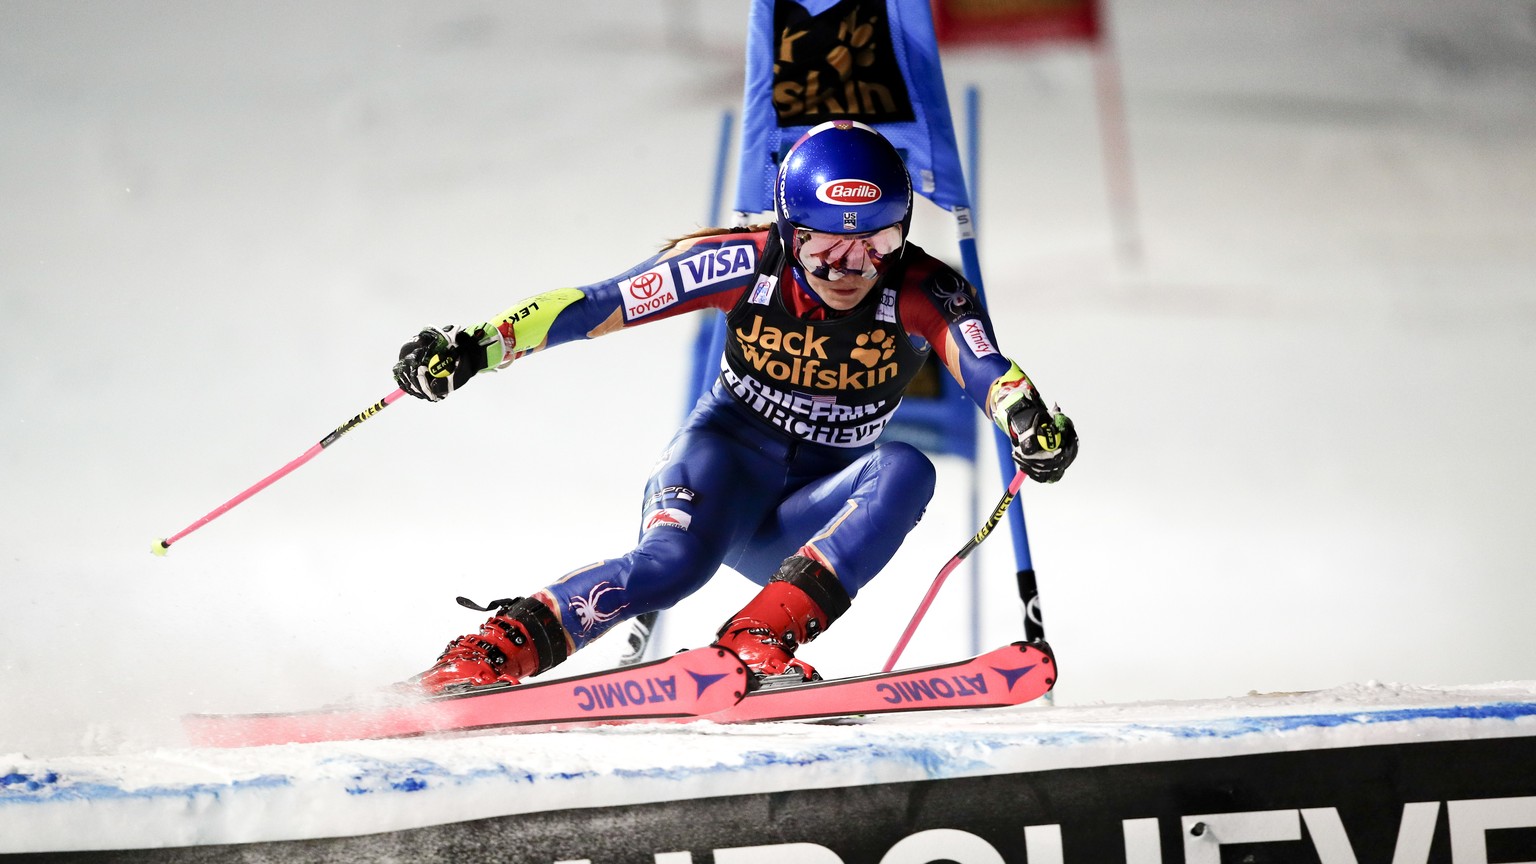 United States&#039; Mikaela Shiffrin competes during an alpine ski, women&#039;s World Cup parallel slalom in Courchevel, France, Wednesday, Dec. 20, 2017. (AP Photo/Gabriele Facciotti)